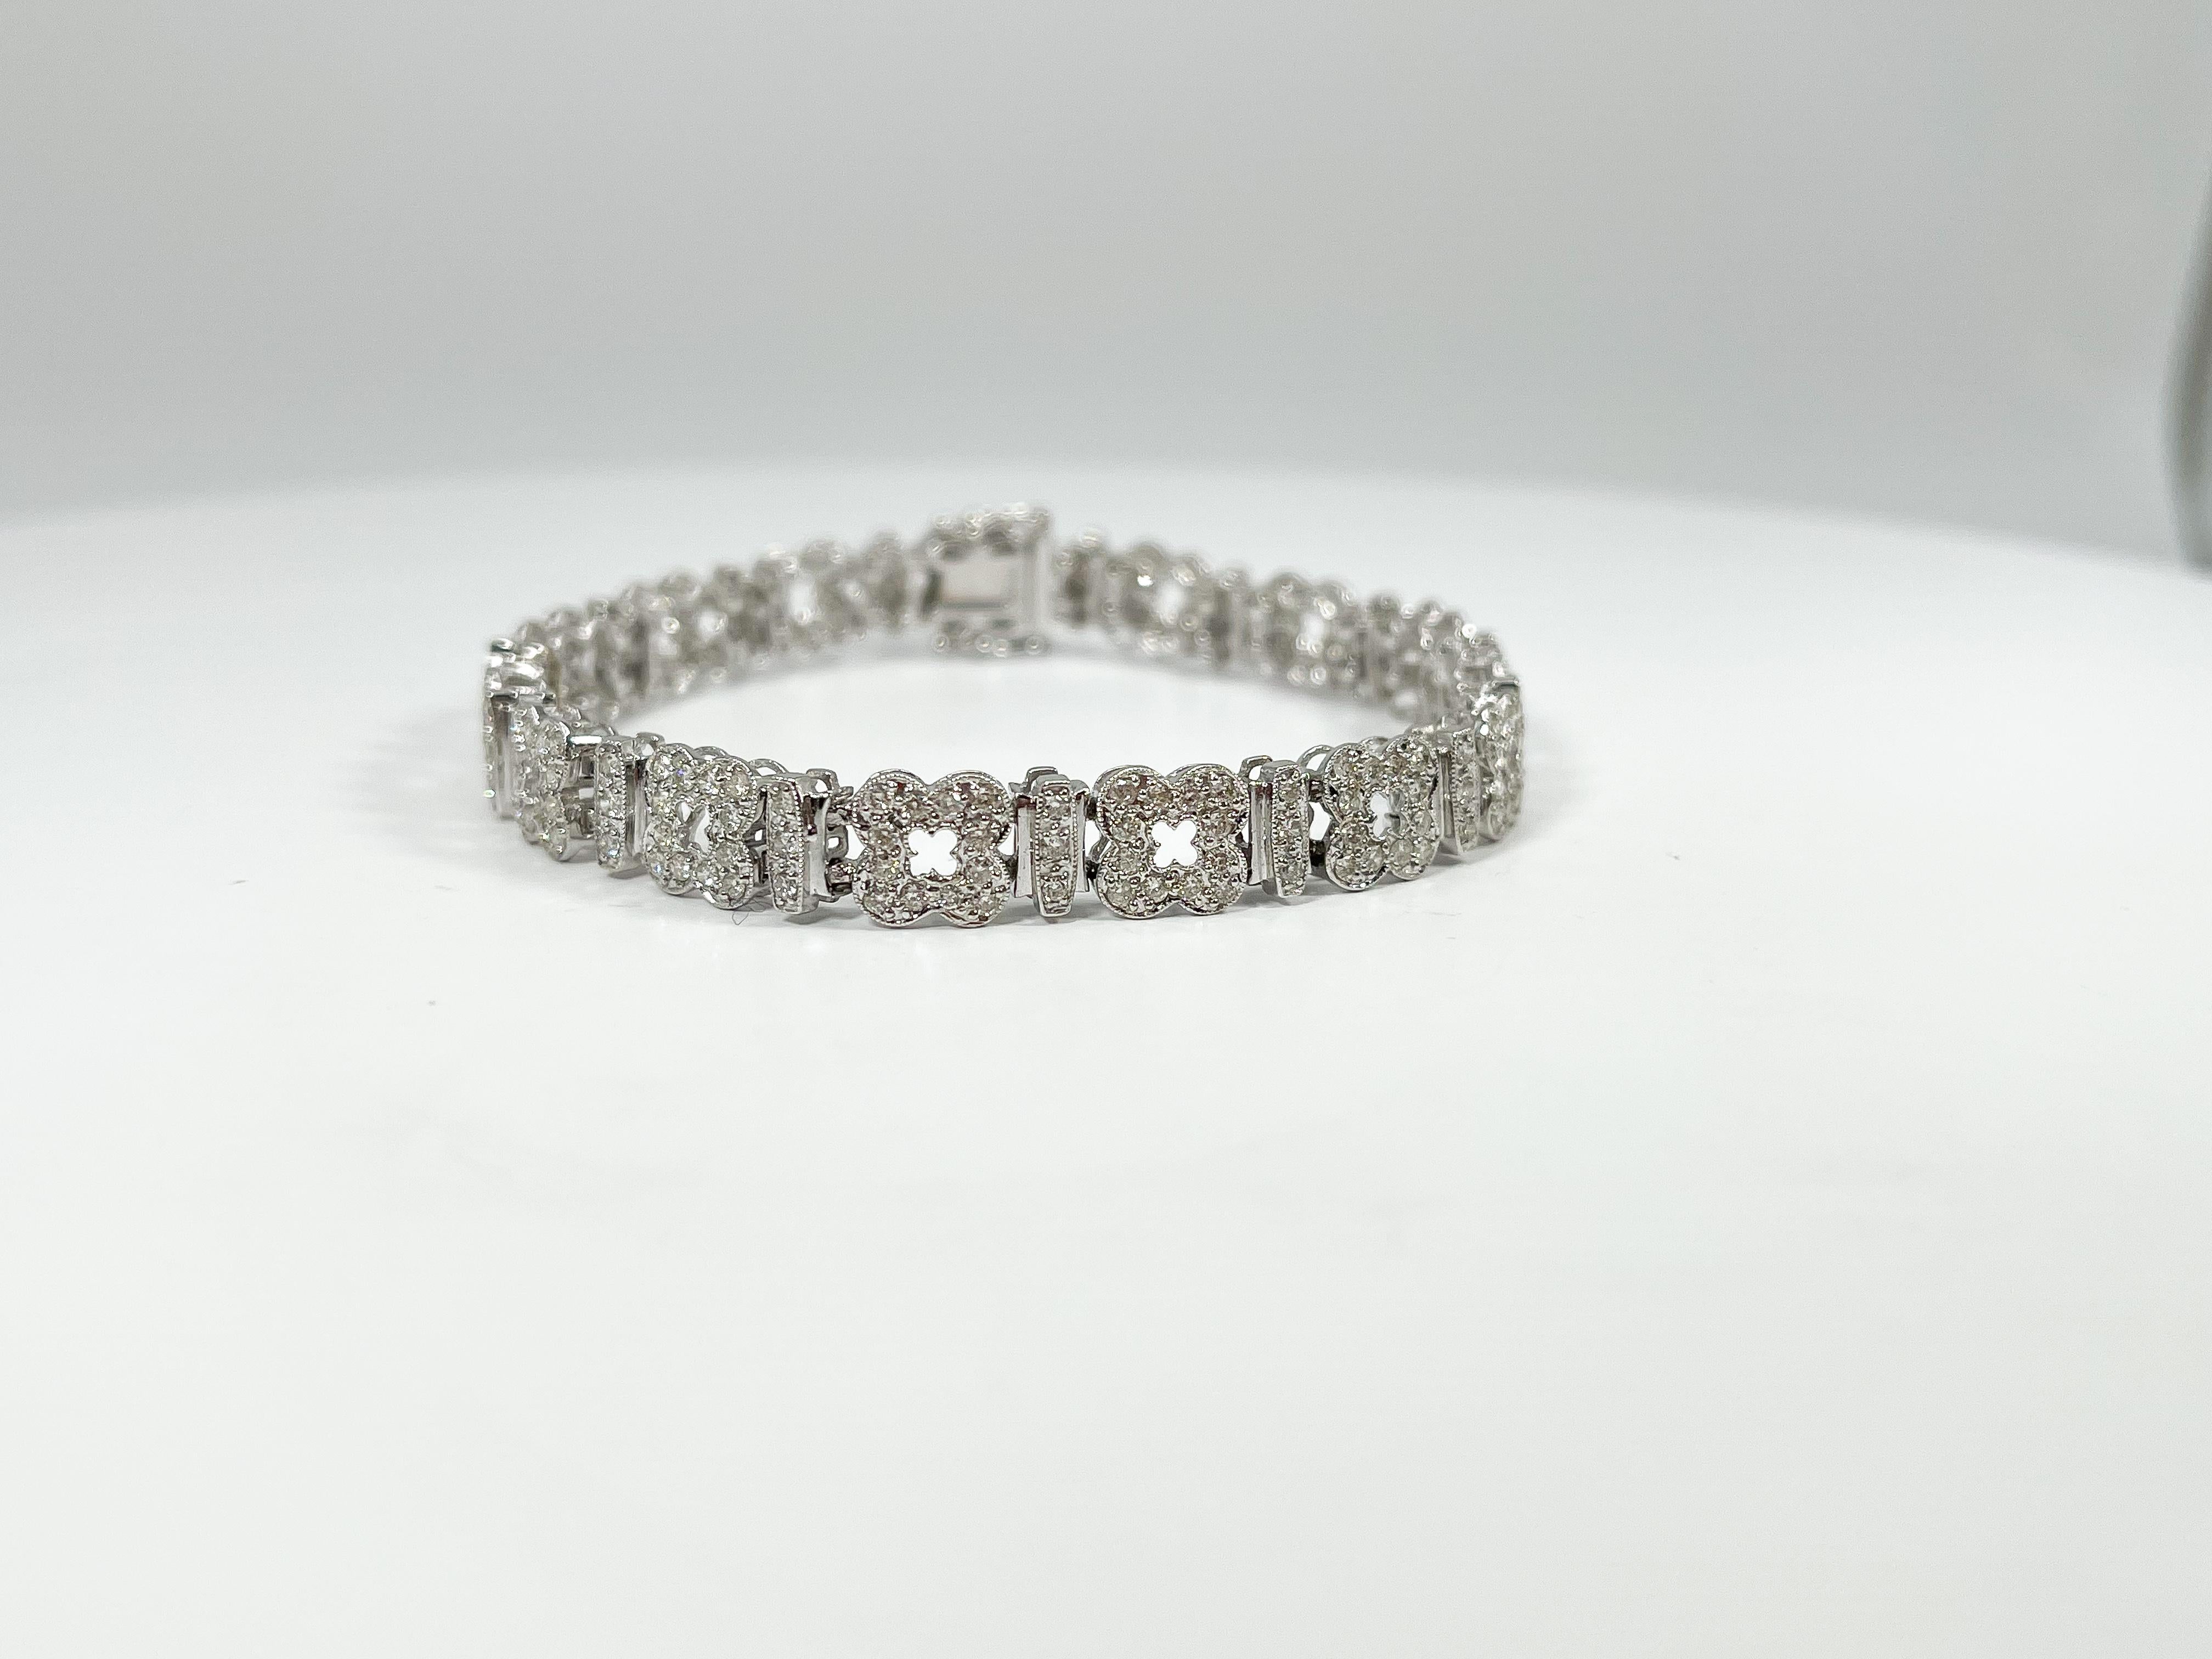 14k white gold diamond flower bracelet 2.50 CTW. All stones are round, bracelet measures 7 inches, and has figure 8 clasps for closure, and the bracelet has a total weight of 15.6 grams.